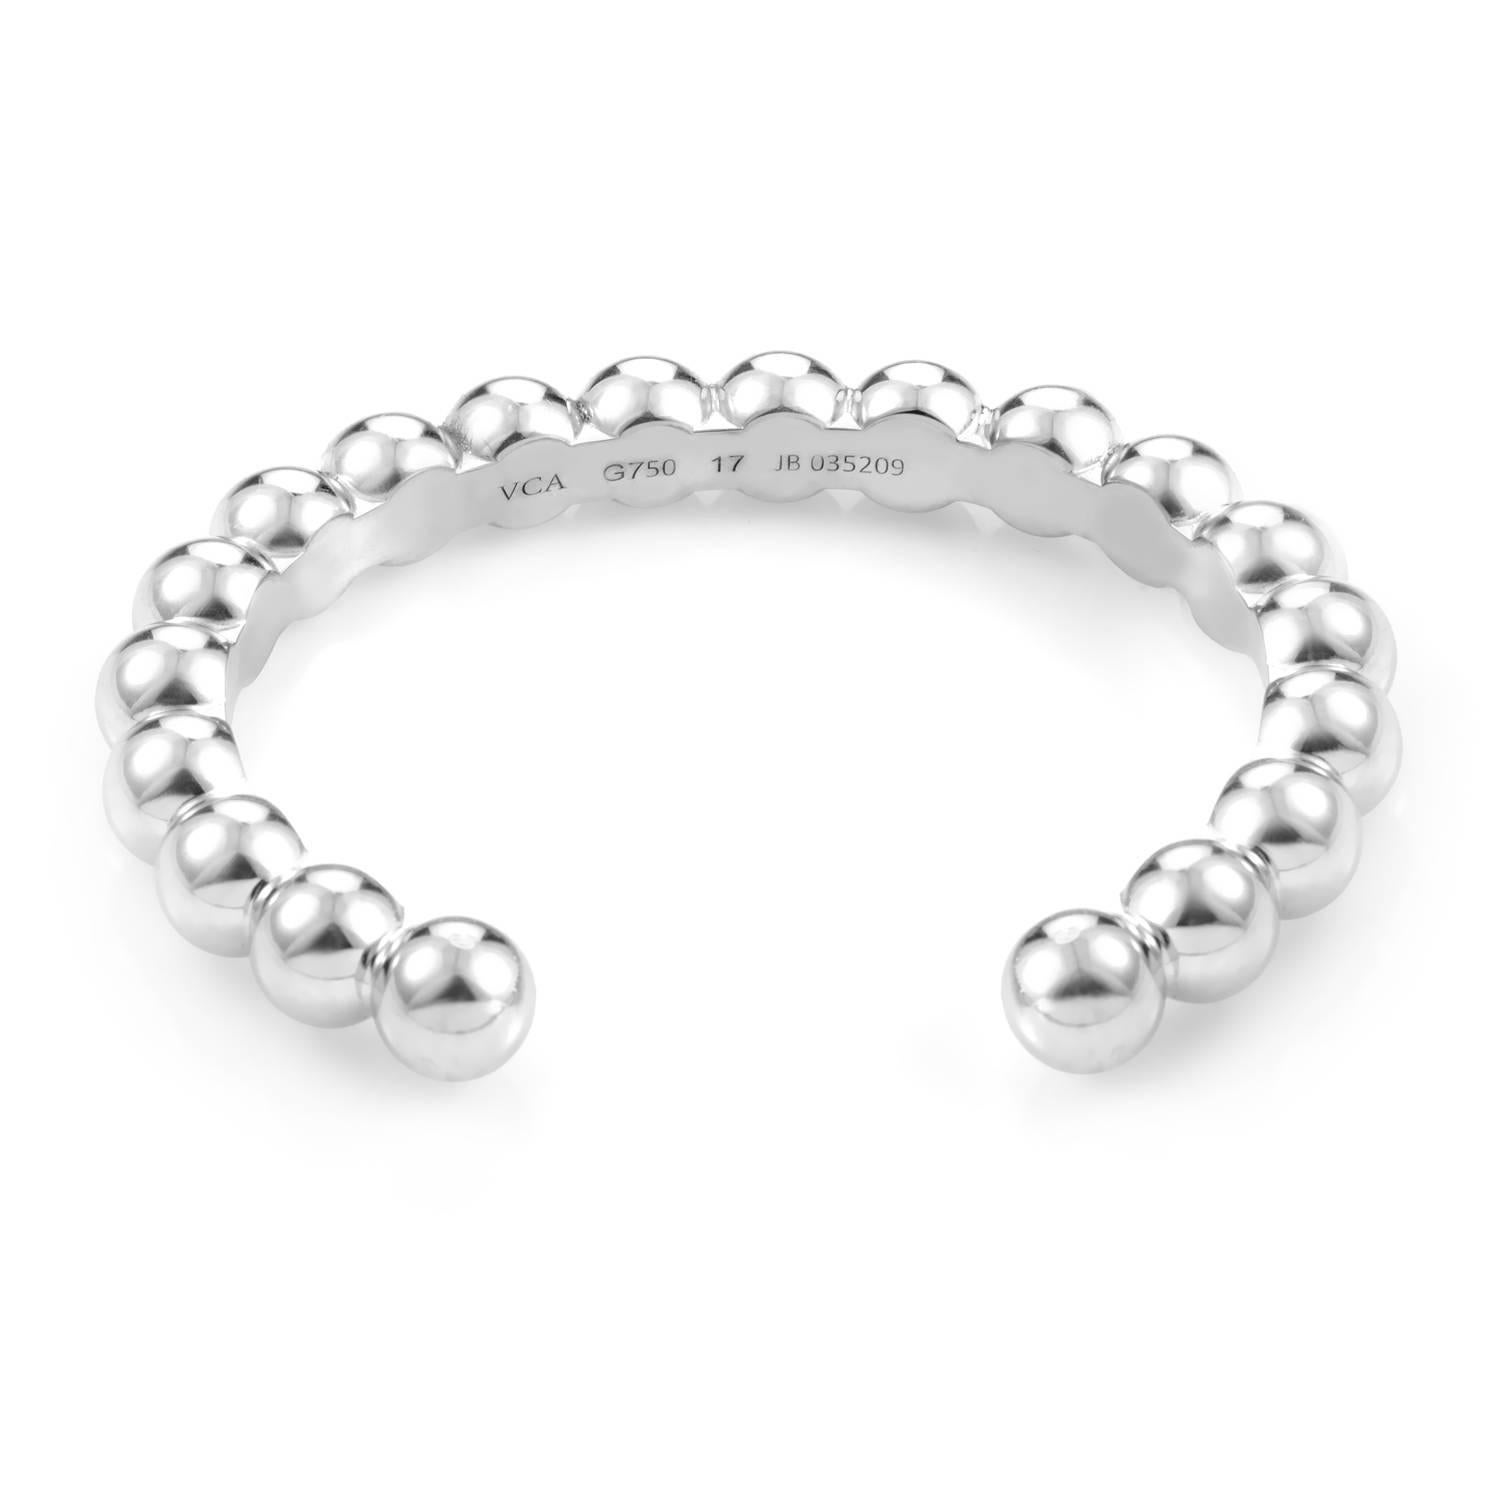 This charming bangle by Van Cleef & Arpels is made with crisp 18K white gold and shimmers in its bead chain design while perfectly curved to fit to one's wrist.
Retail Price: $13,500.00 (Plus Tax)